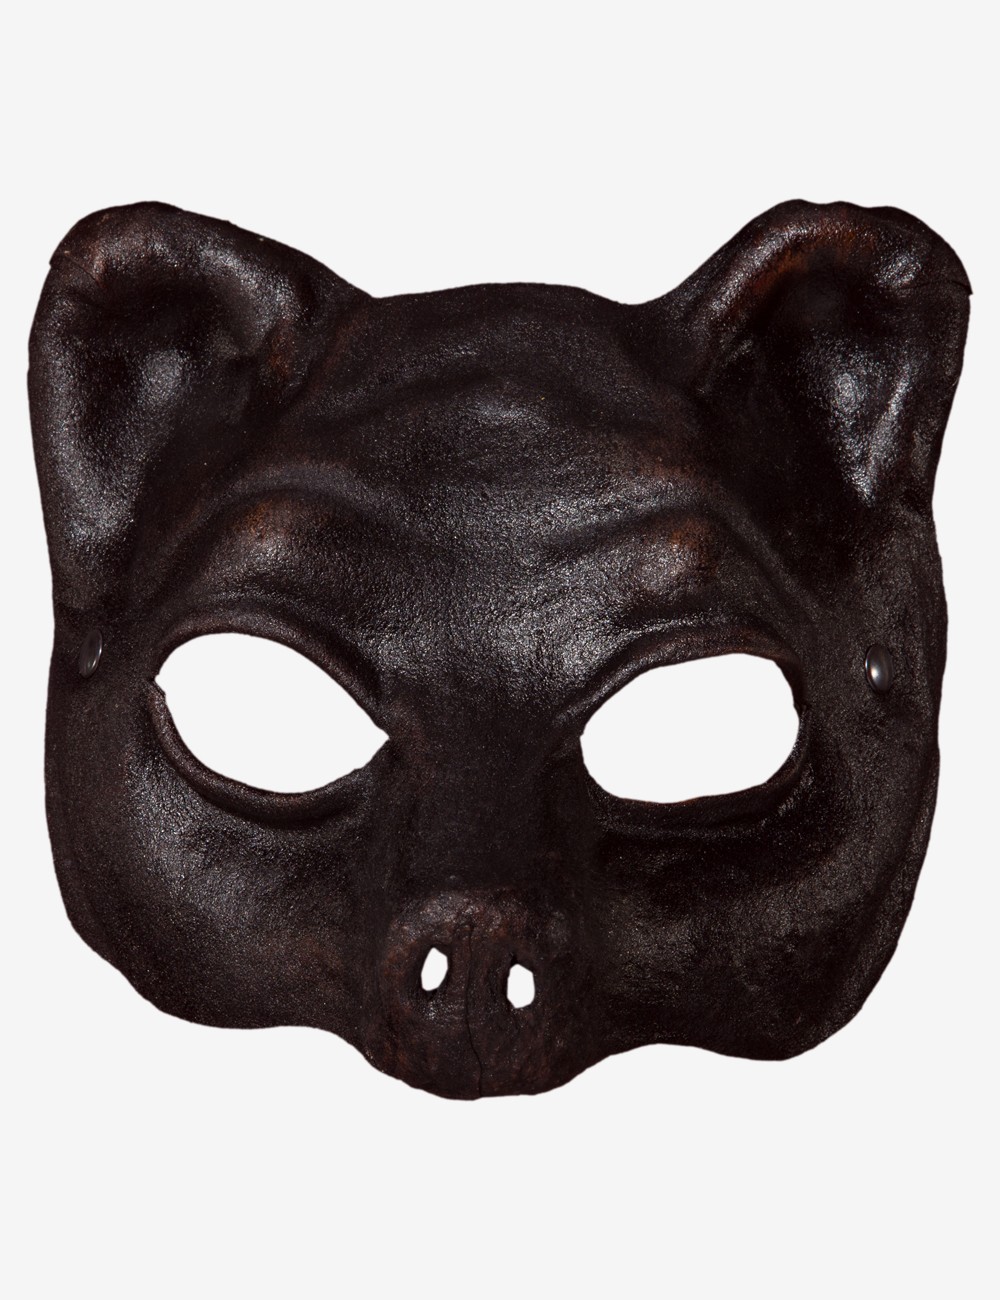 Black Bear Mask - Made in Italy